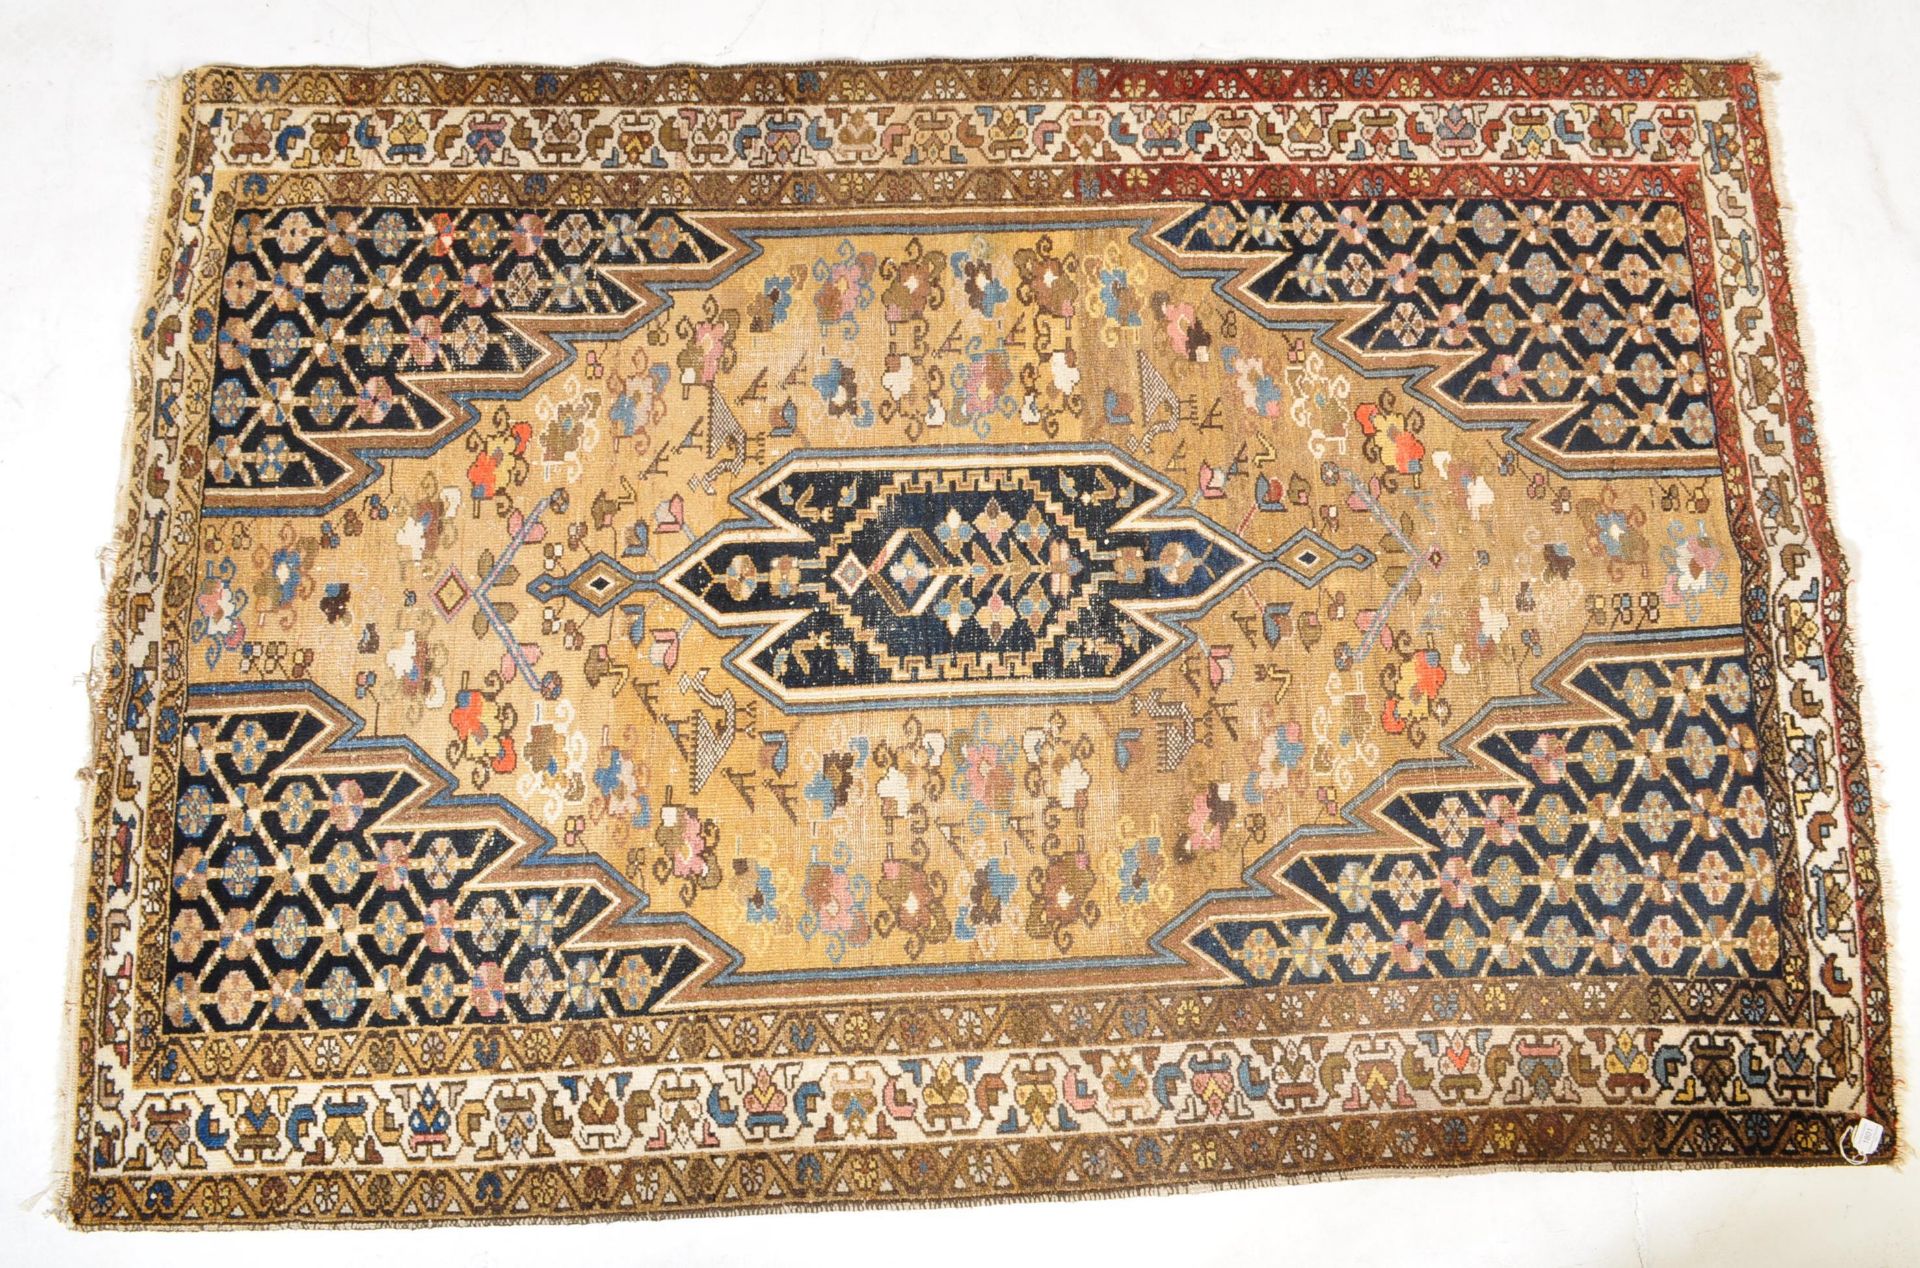 A late 19th century Persian Islamic Mazlagan / Maleyer floor carpet rug in green earthy tones with a